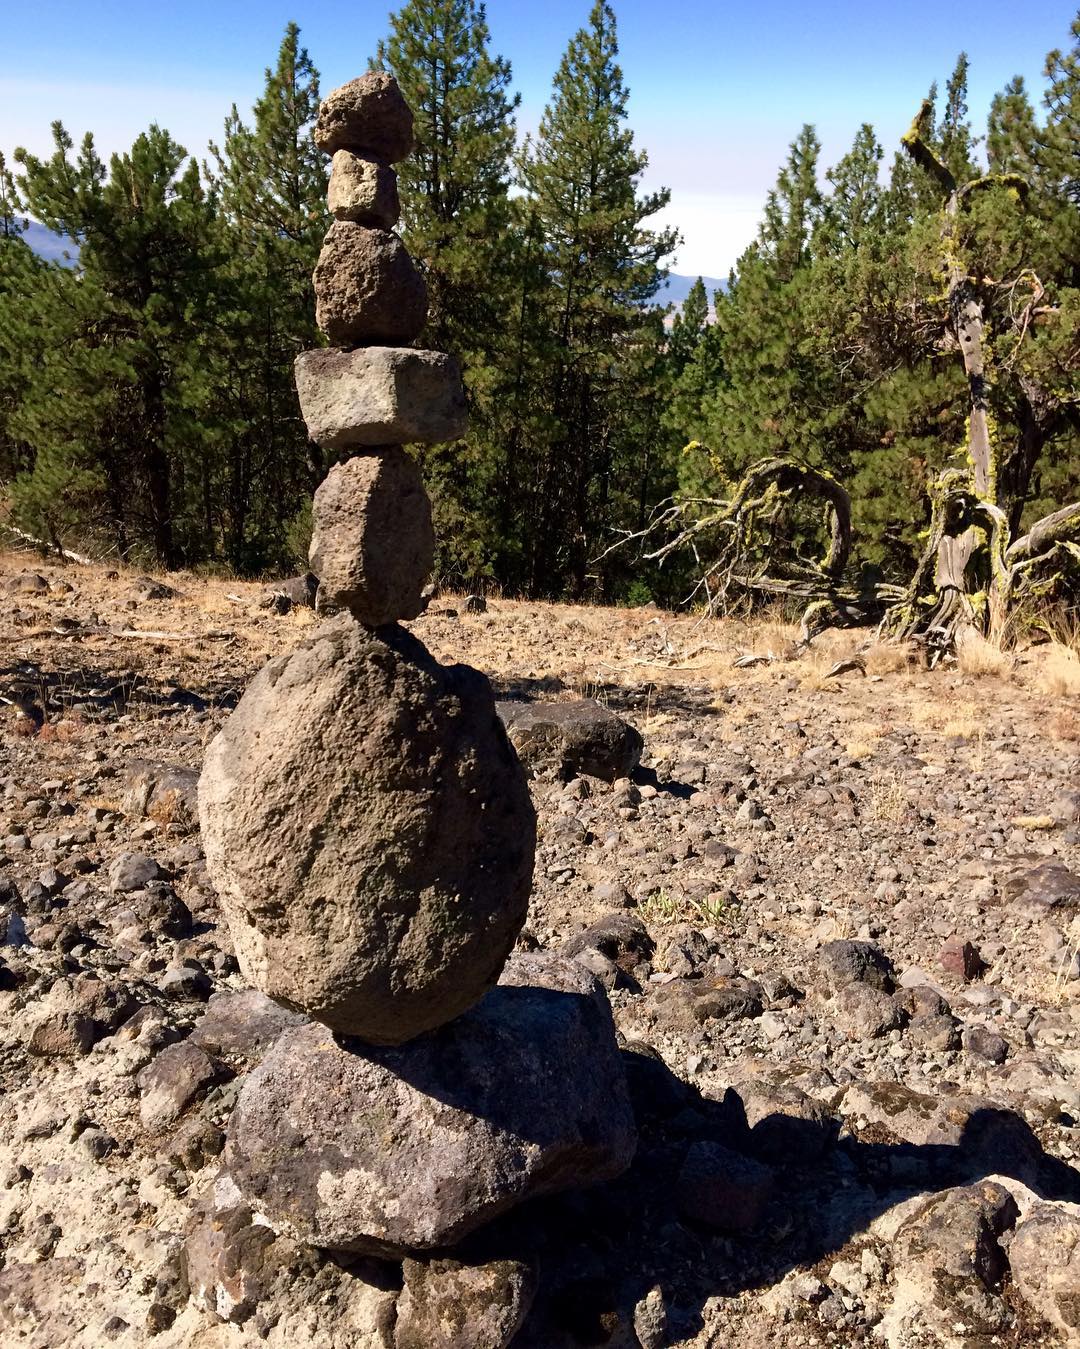 We stacked some rocks waiting for an eclipse ☀️🌑